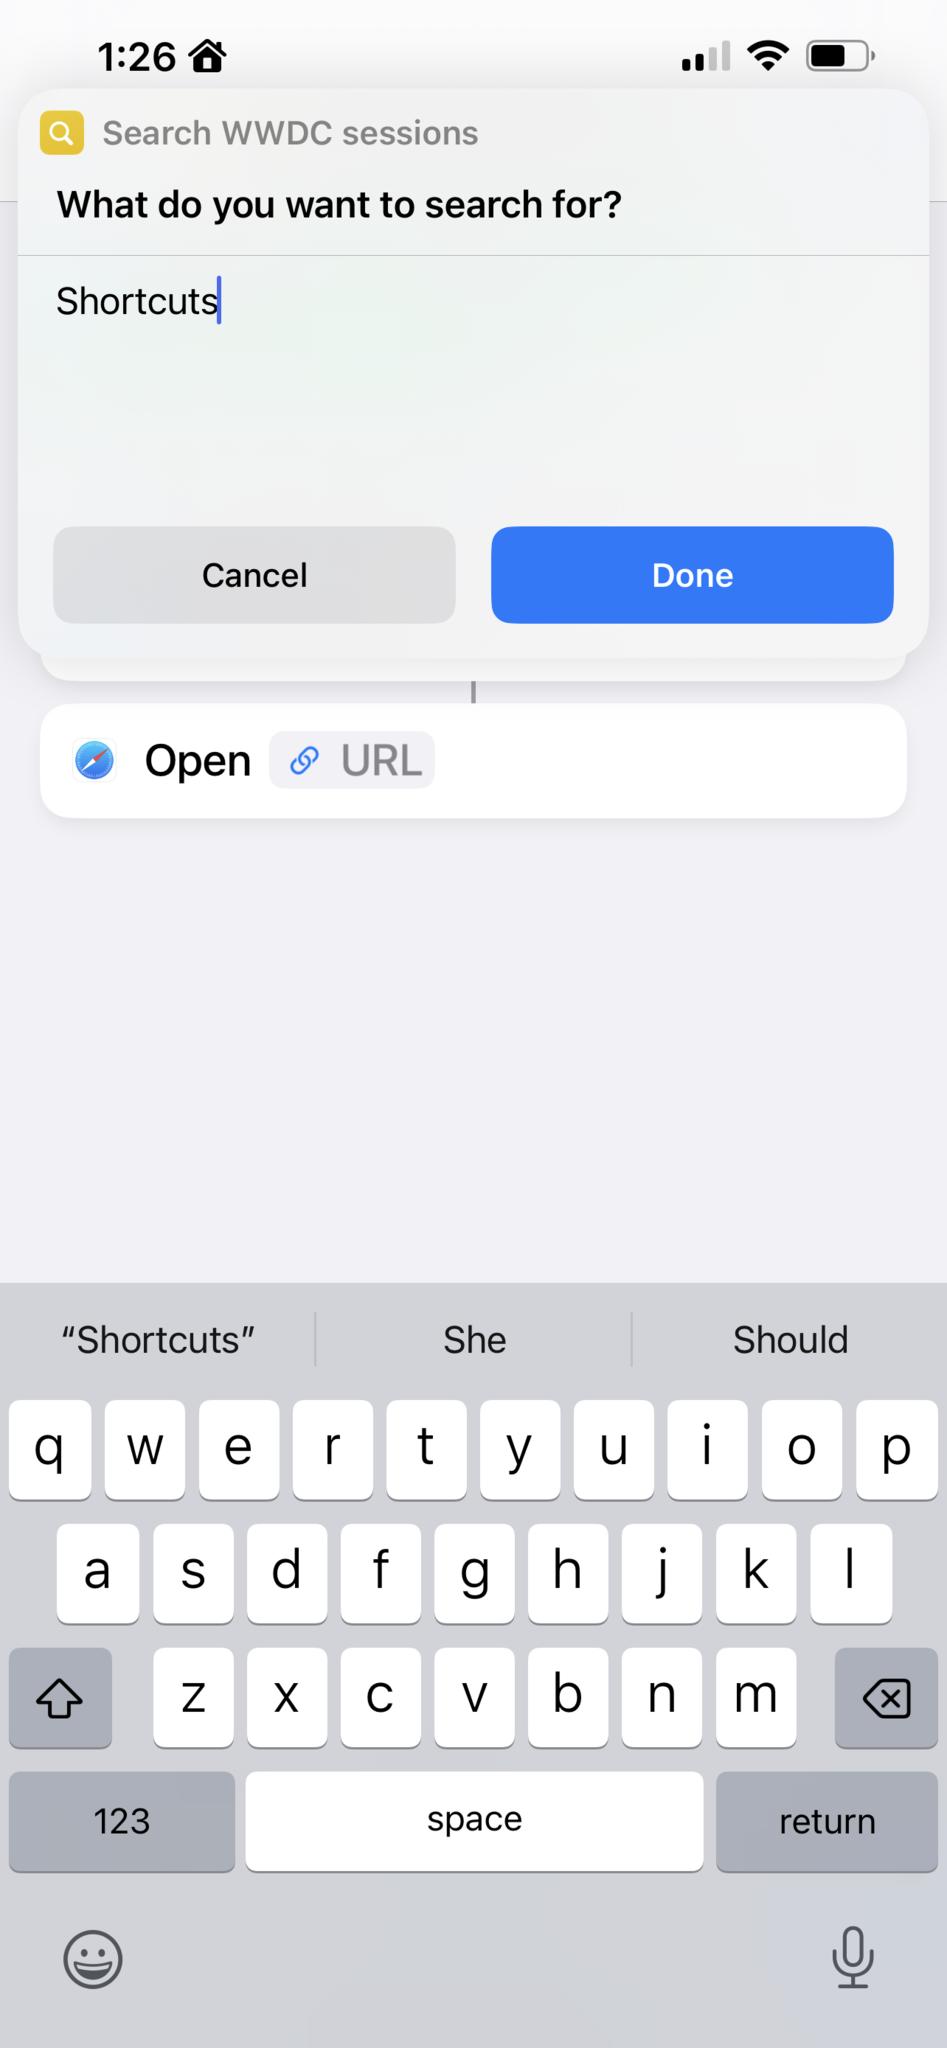 Screenshot showing the "Search WWDC sessions" shortcut running, displaying a prompt asking "What do you want to search for?" and "Shortcuts" as the default text.